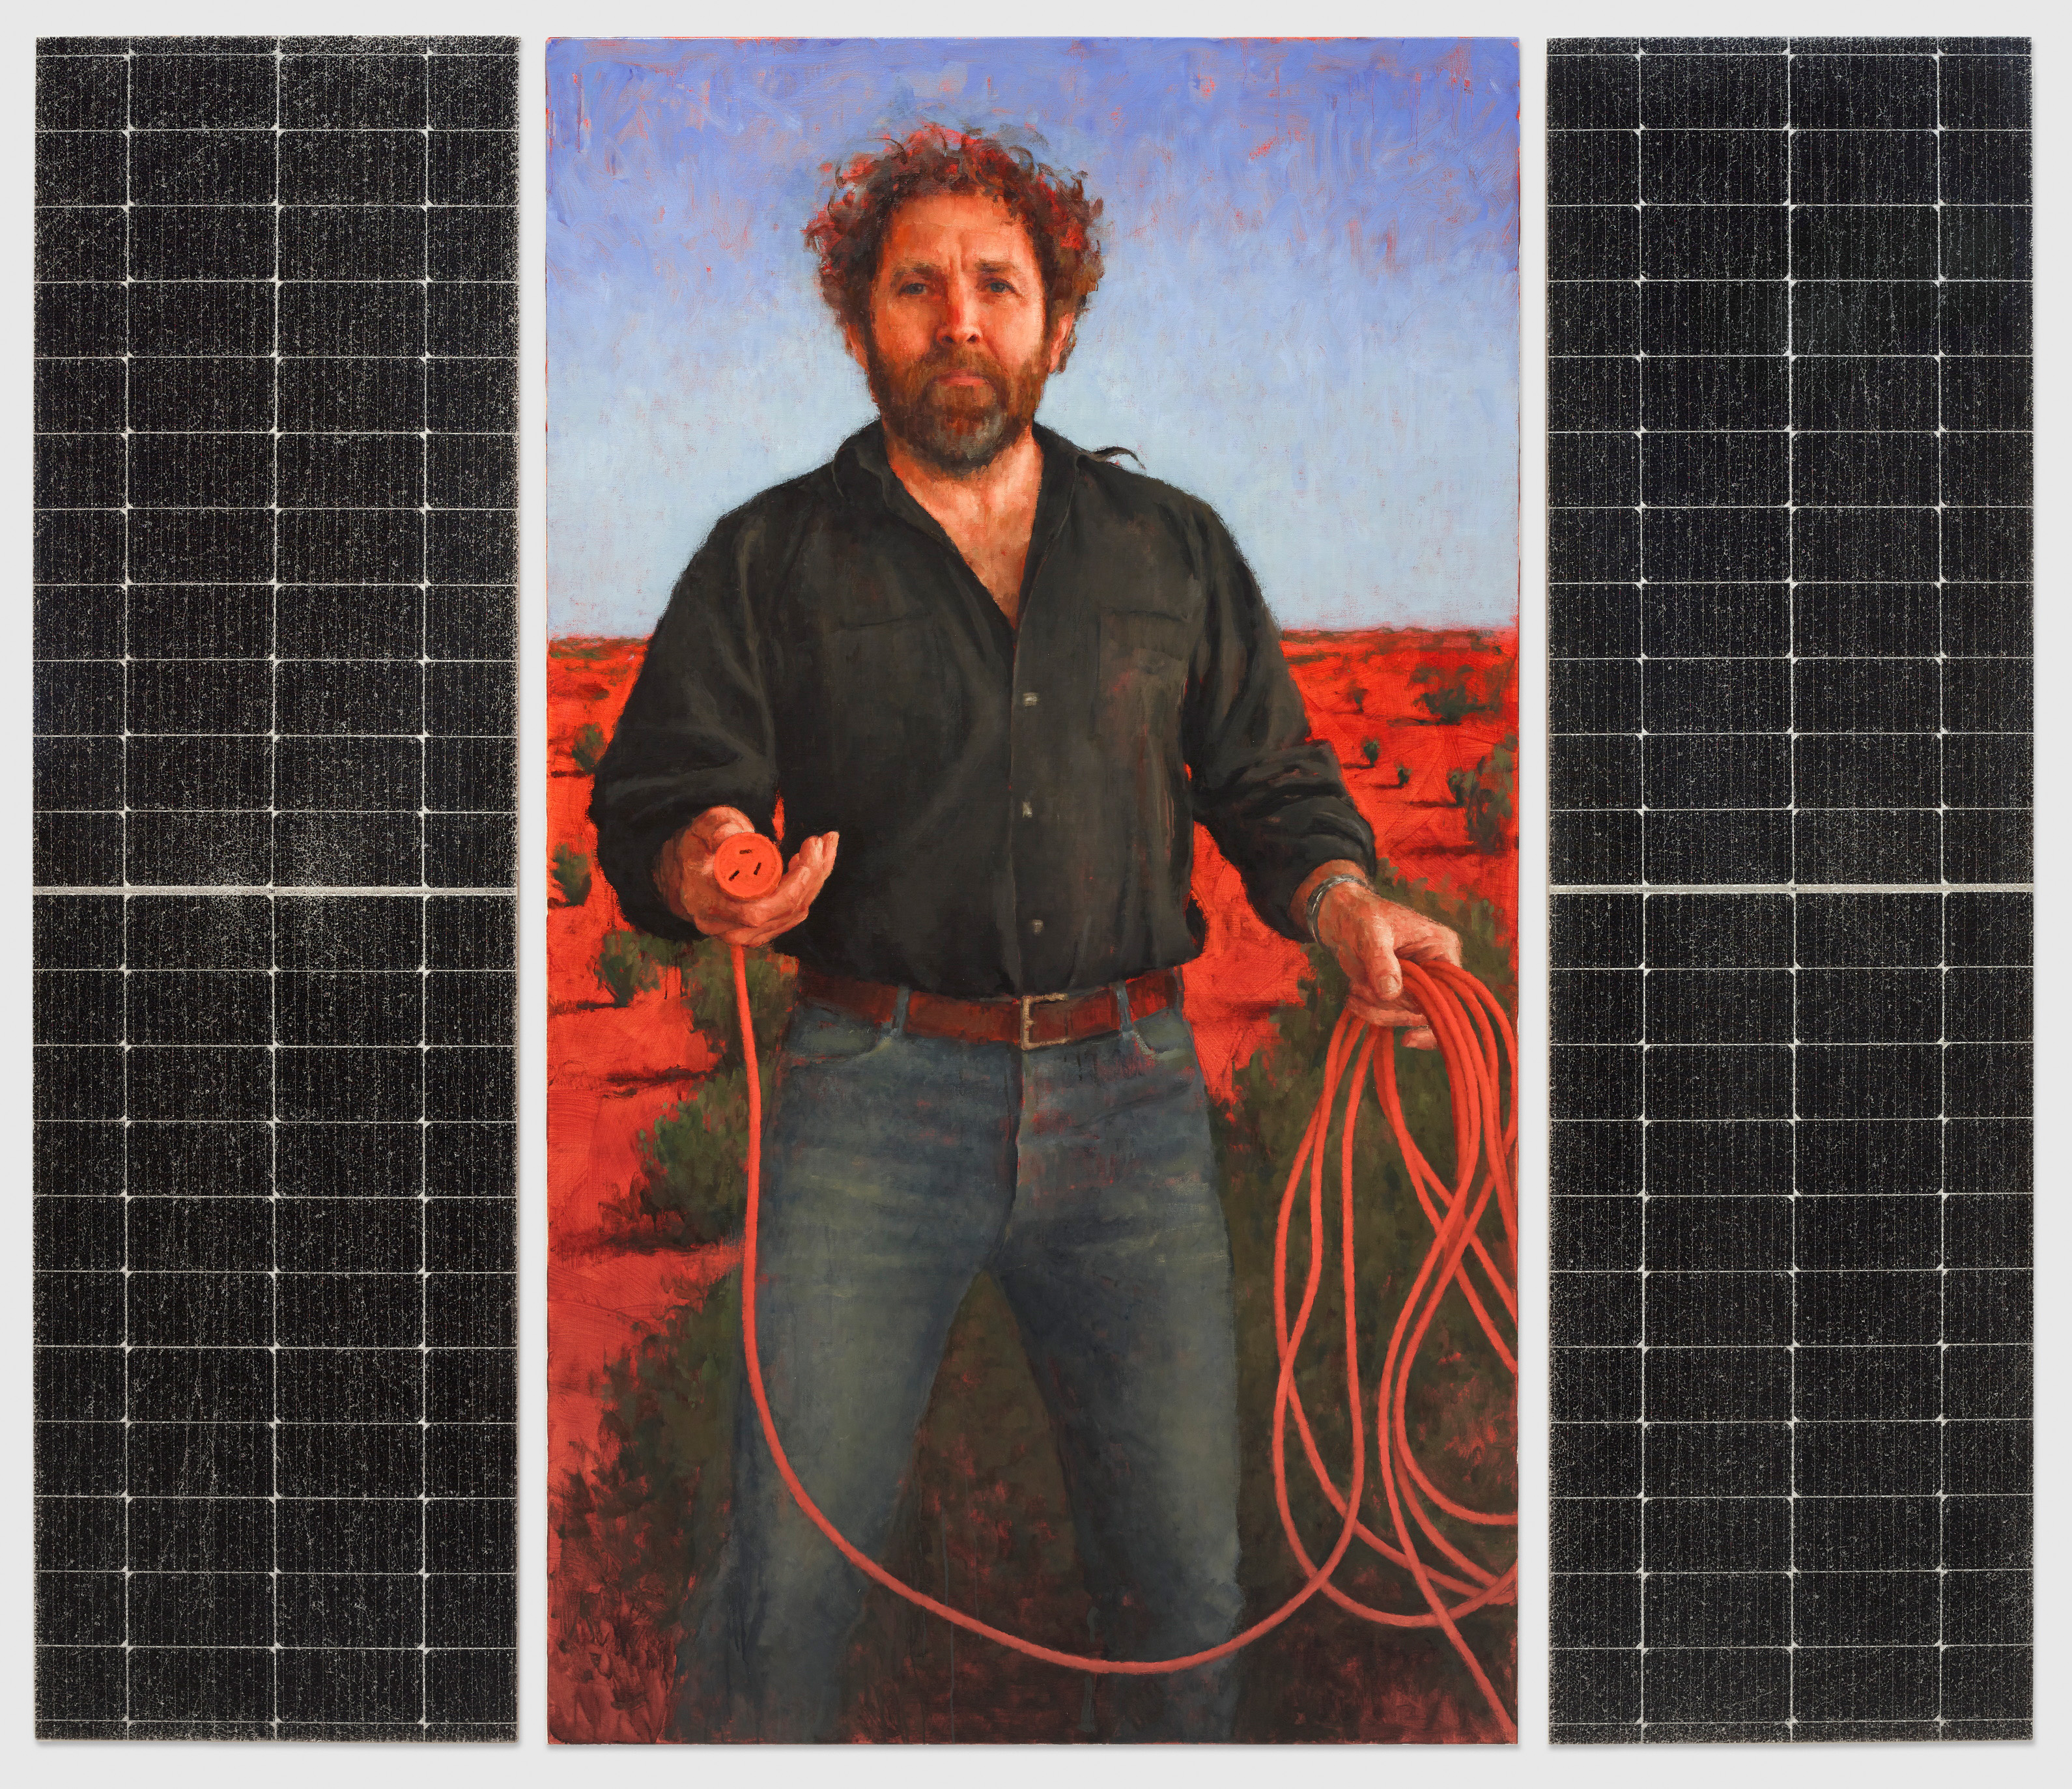 A portrait of a bearded middle-aged man in the outback, holding a red power cord